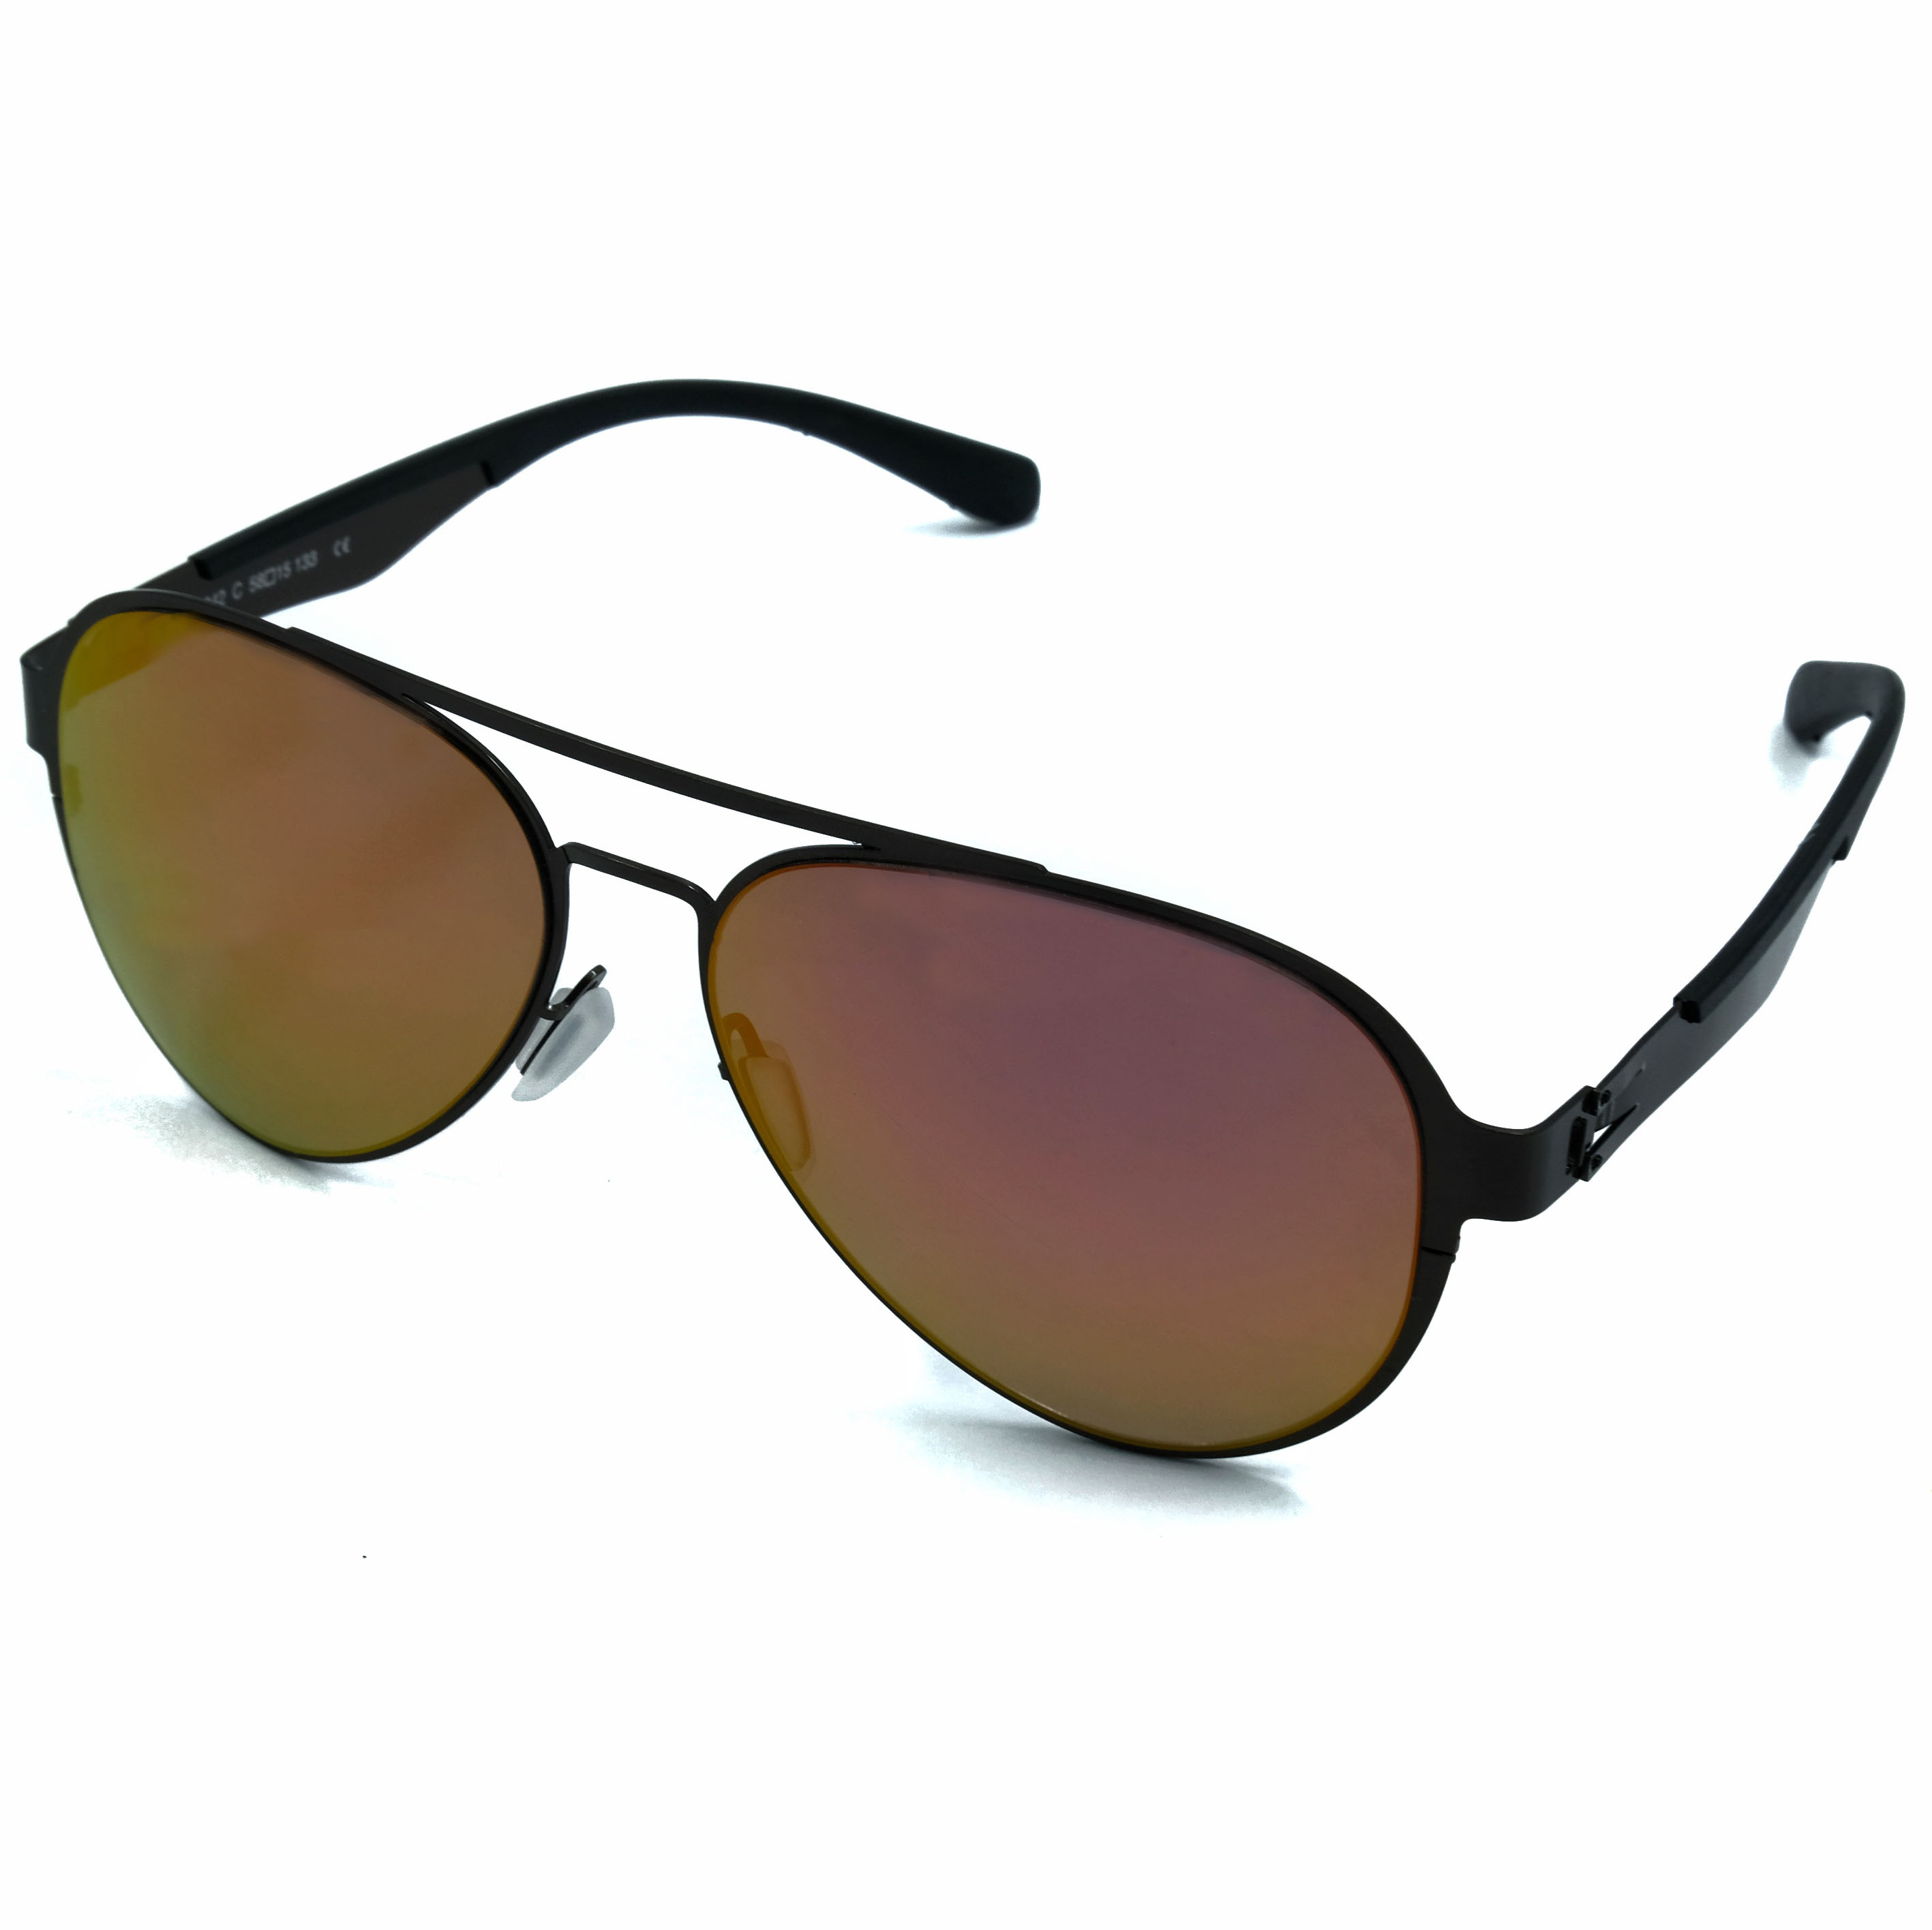 Free Hinge Sunglasses Red Coating Create Your Own Sunglasses with Logo Spectacle Lens Suppliers